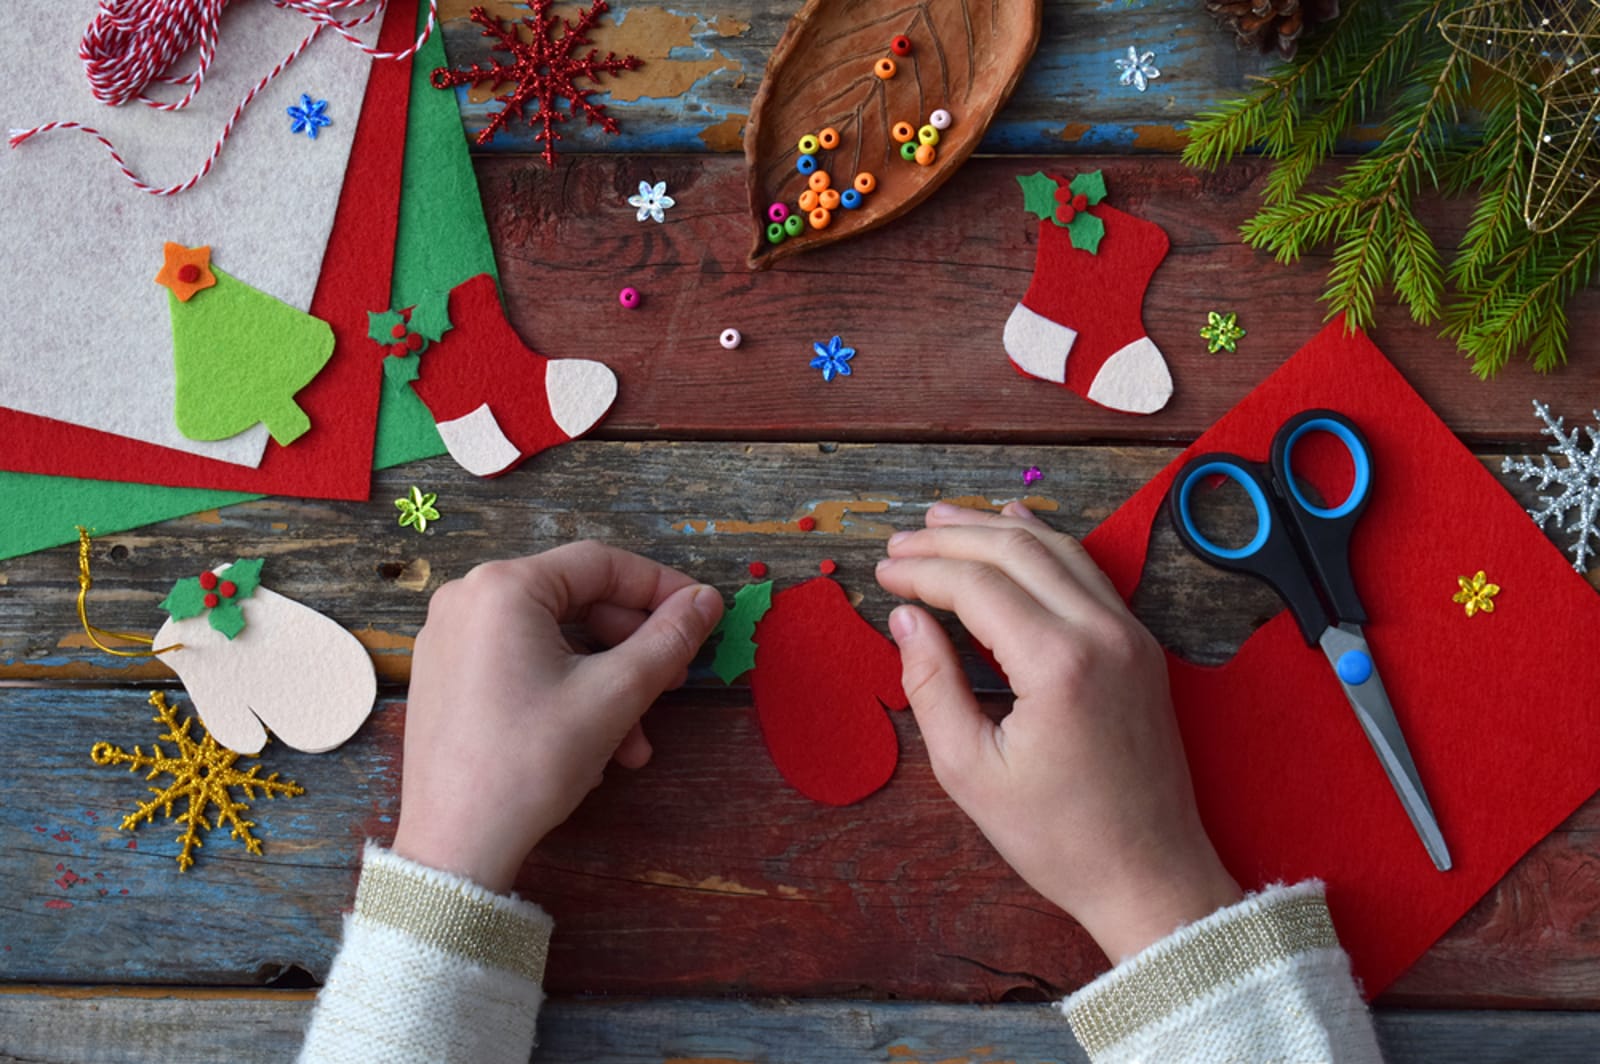 6 Kid-Friendly Christmas Decorations to Make From Trash